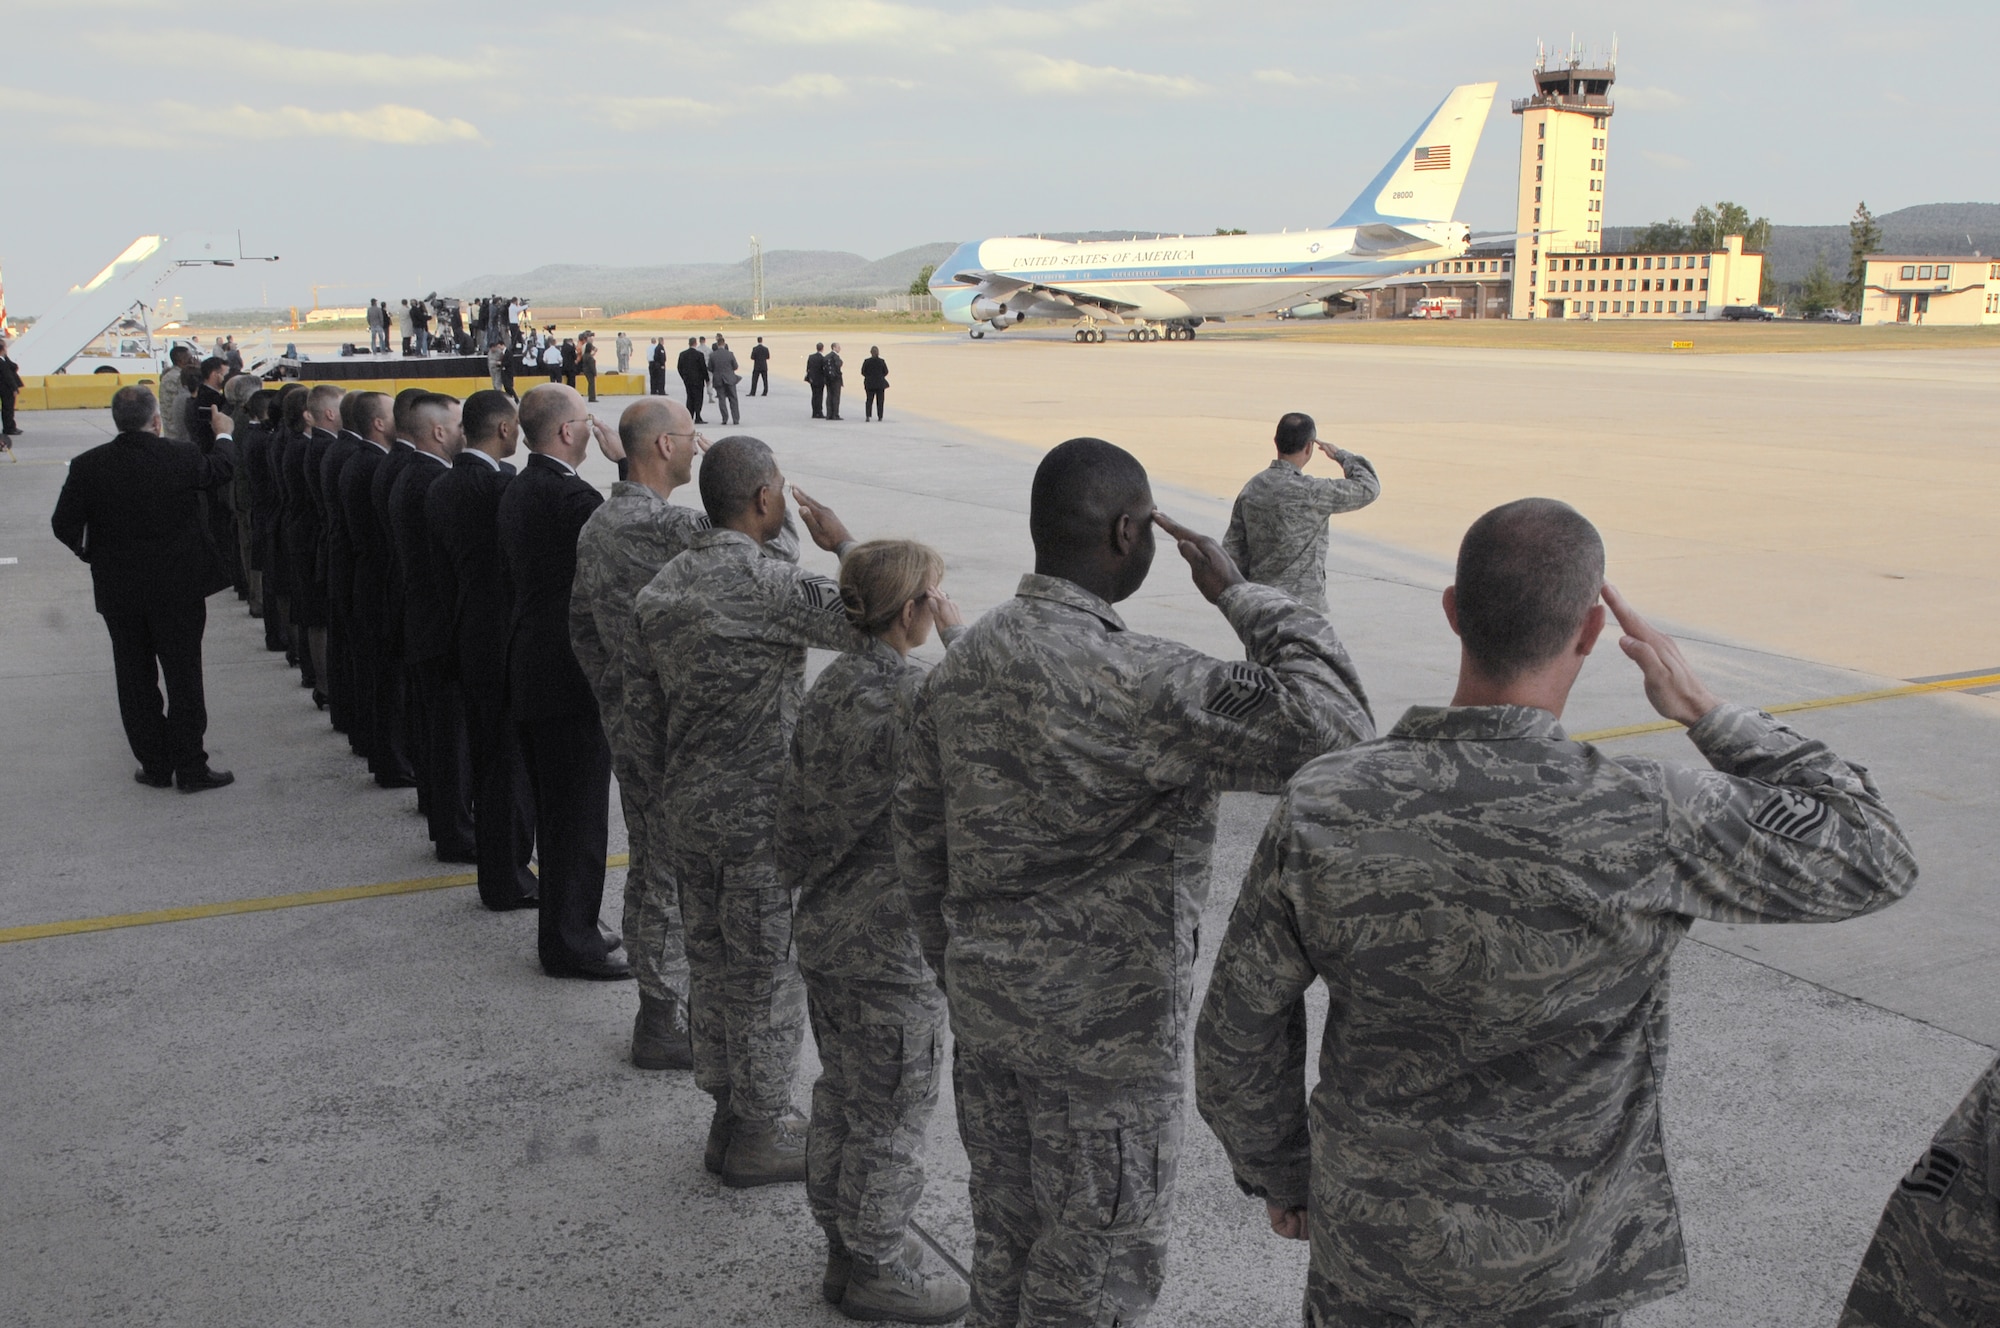 Airmen at Ramstein Air Base, Germany, salute Air Force One June 5 as it taxis for takeoff.  President Barack Obama had stopped at Ramstein en route to nearby Landstuhl Regional Medical Center to visit wounded U.S. servicemembers being treated there. (U.S. Air Force photo/Senior Airmen Kenny Holston)